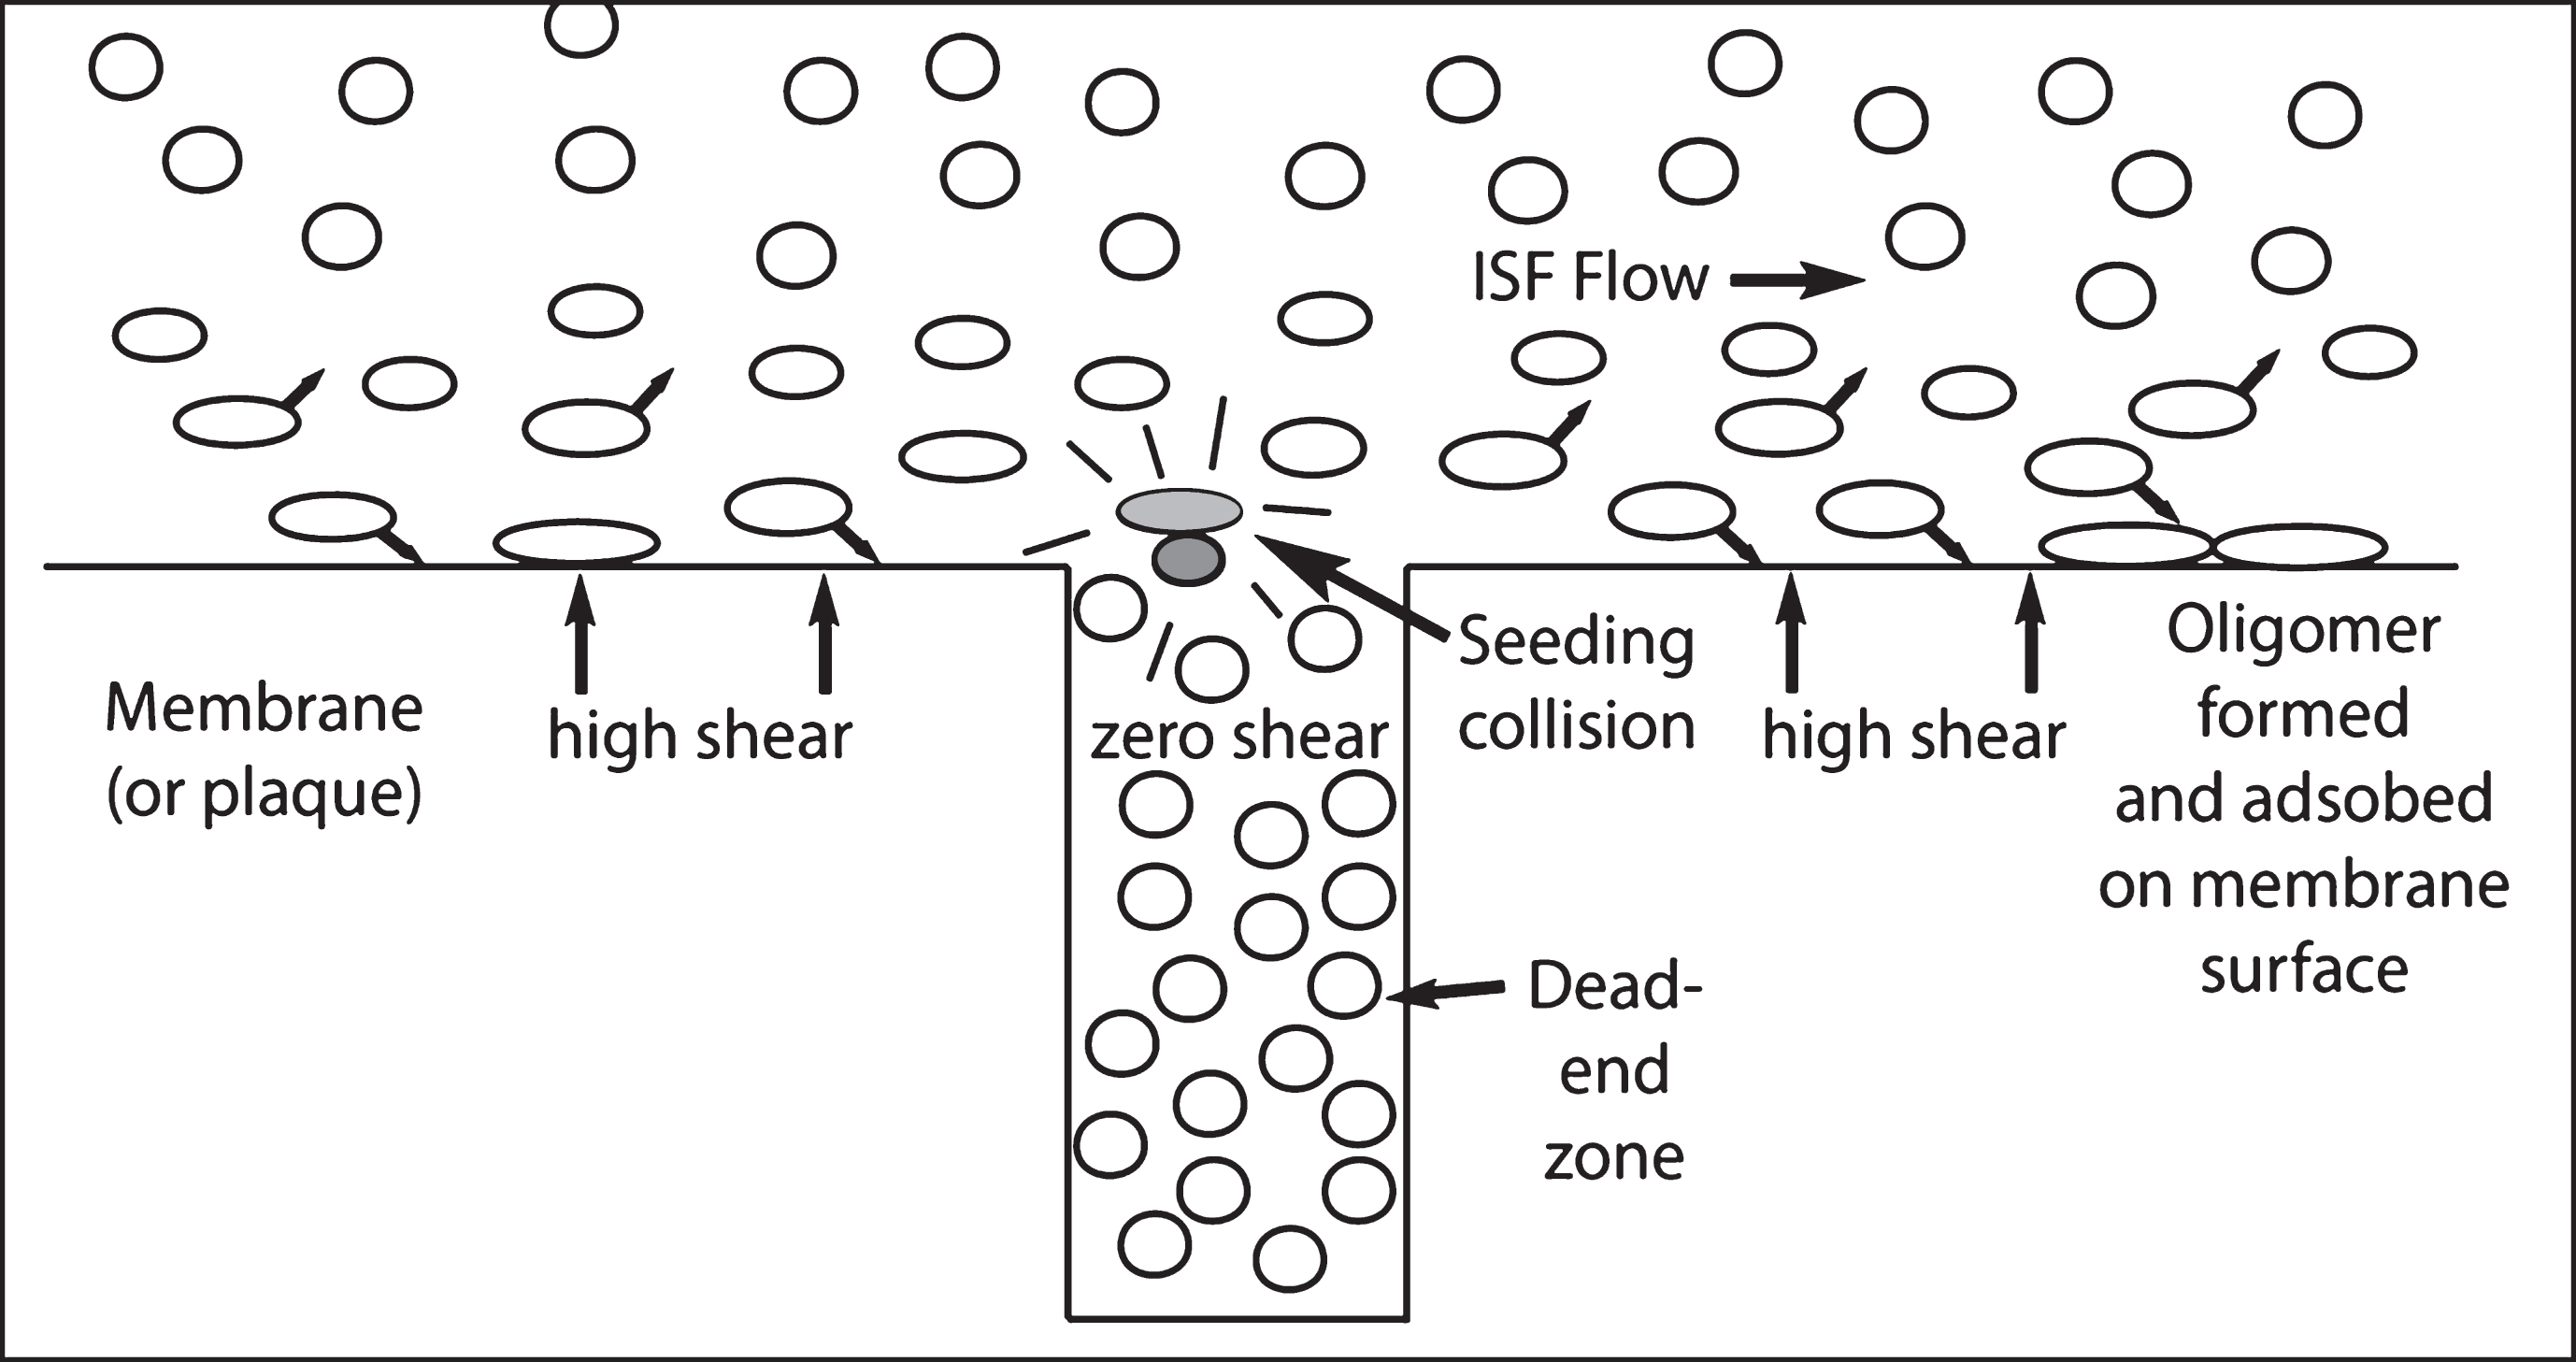 Representation of a low shear zone pocket in contact with a high shear zone flow region. It also represents the shear-induced separation of molecules near the high flow zone surface, such as a membrane, into those molecules that adsorb to the surface and those that are forced to migrate in the direction of lower shear away from the surface. At the entrance to the pocket, which is a dead-end zone, a passing shear-energized molecule next to a nearby wall segment senses a lower shear zone, preferentially migrates into it [Metzner], and increases the concentrations of molecules in the dead end zone. An occasional shear-energized molecule can act as a seed that initiates a templated conformational change [6] in the dead-end zone Aβ molecule collection, forming AβO molecules.